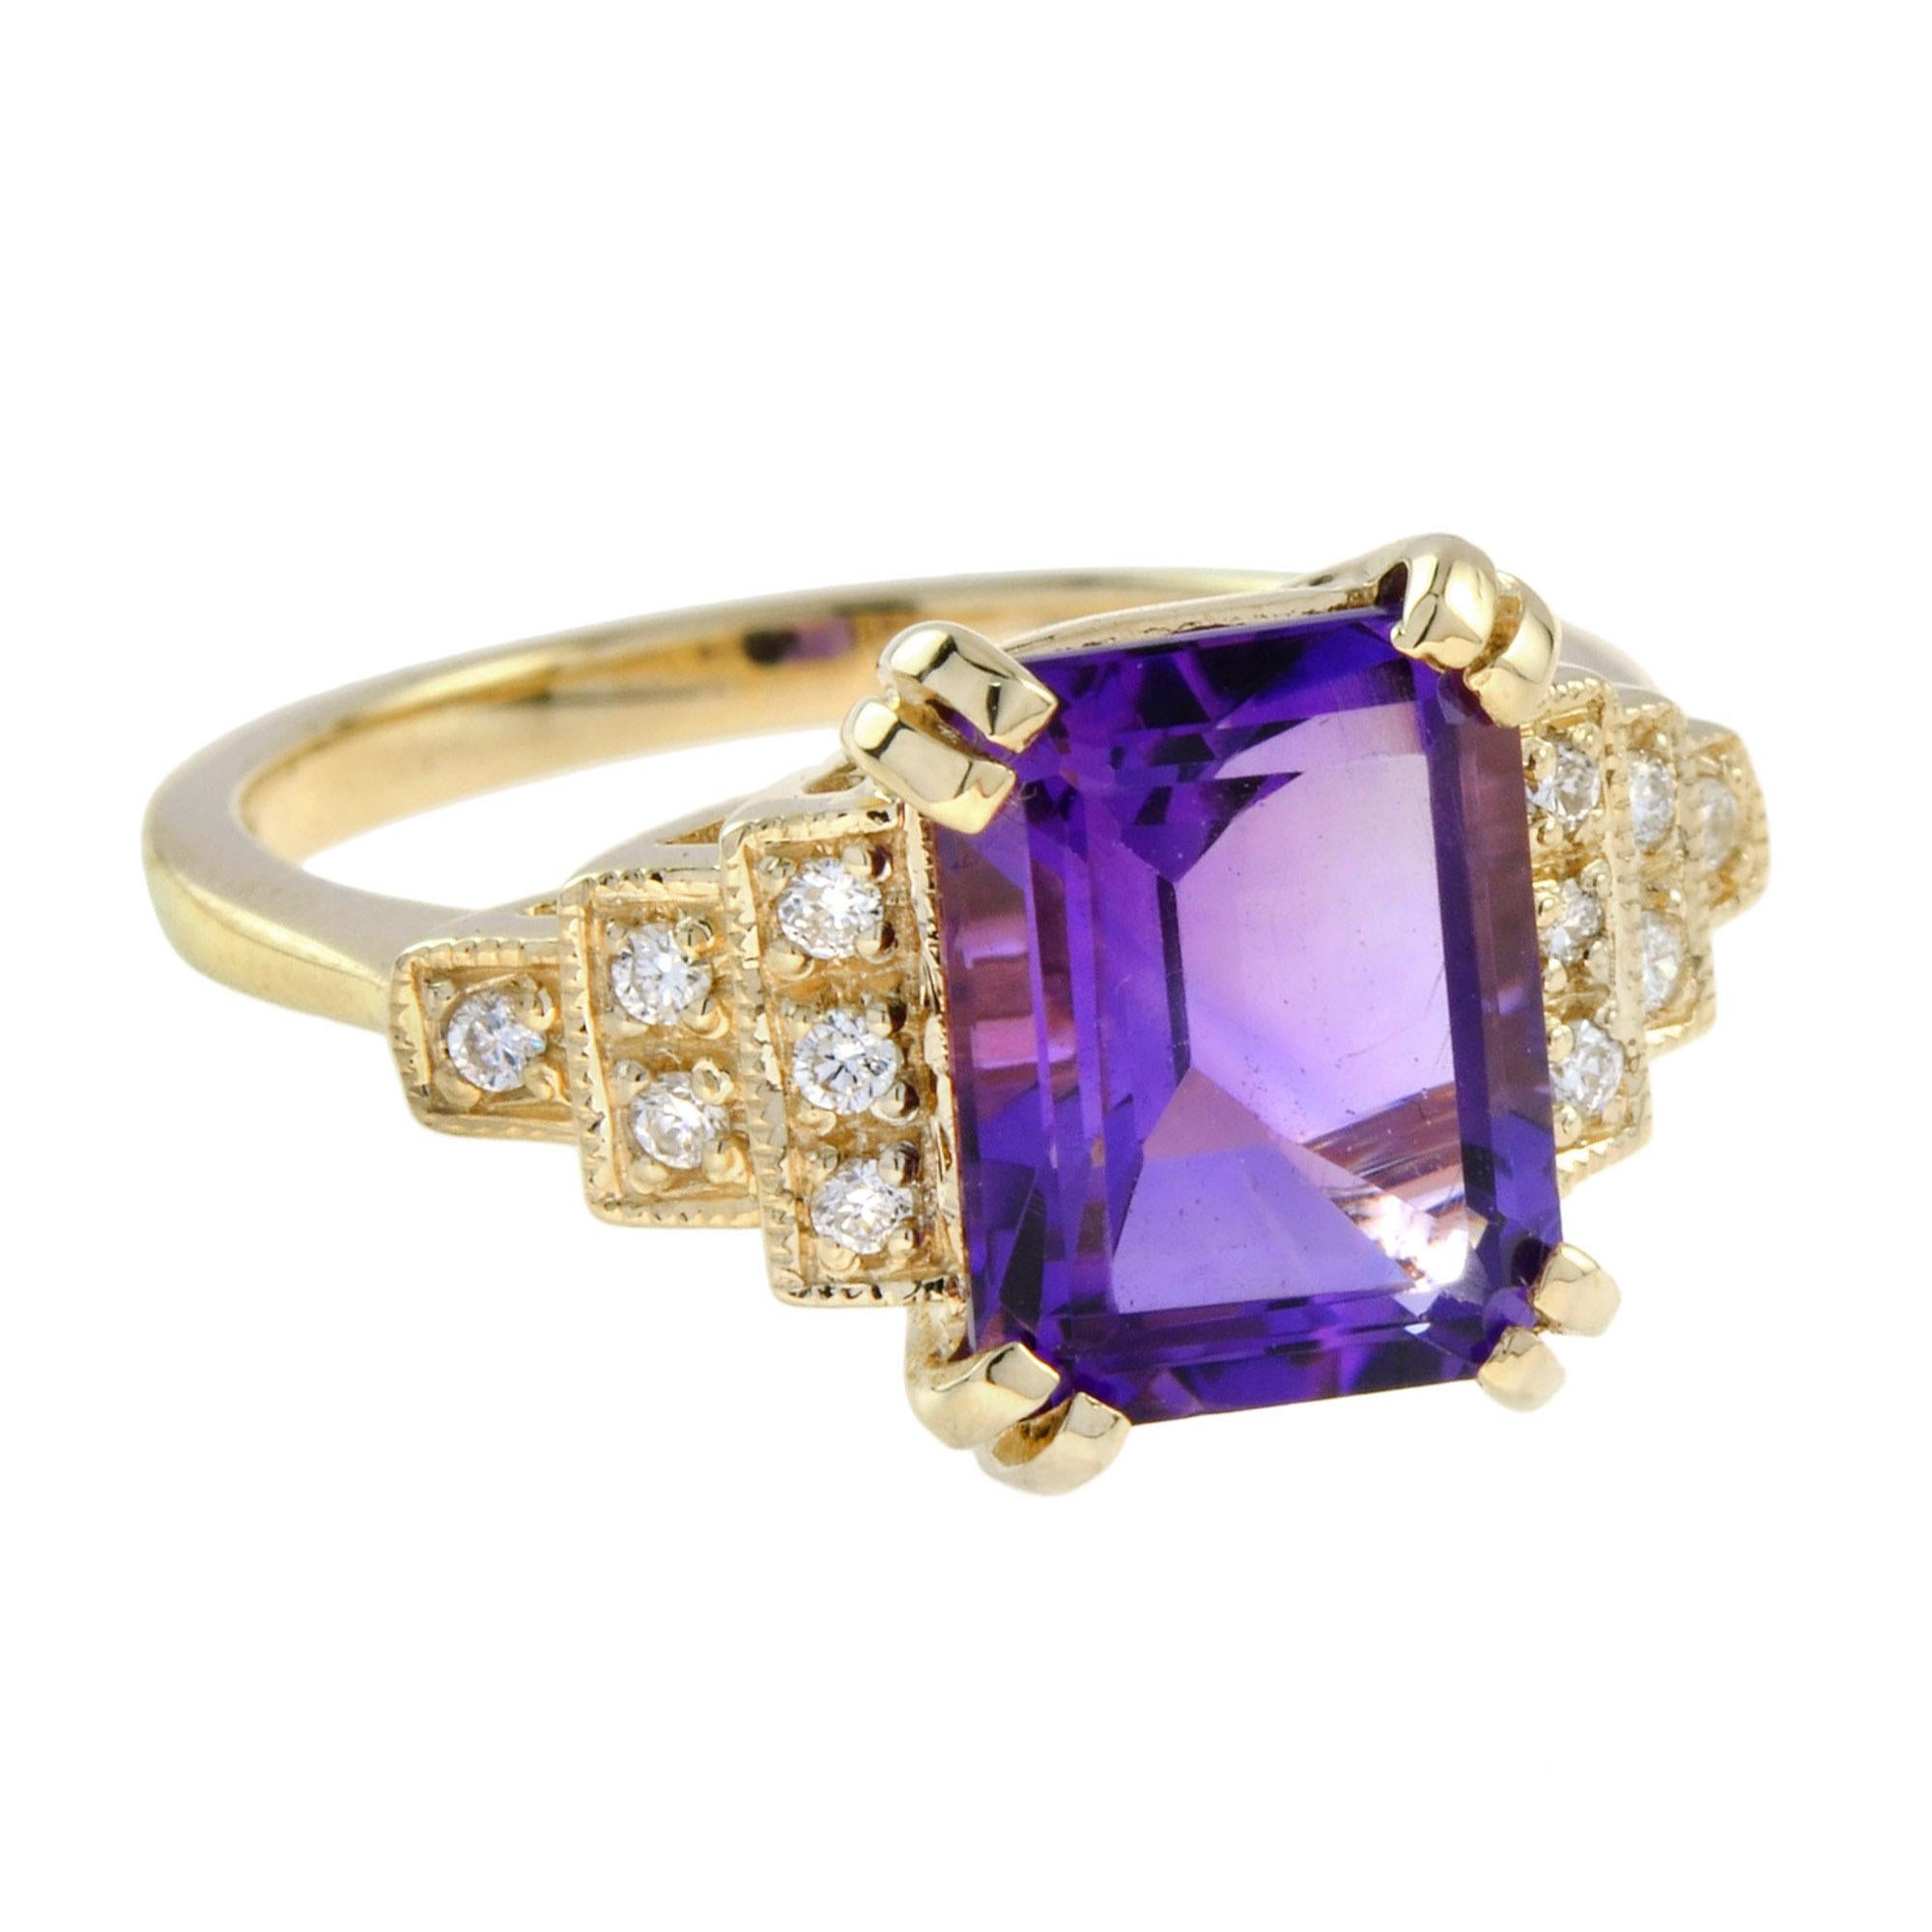 For Sale:  Emerald Cut Amethyst and Diamond Step Shoulder Engagement Ring in 14K Gold 3